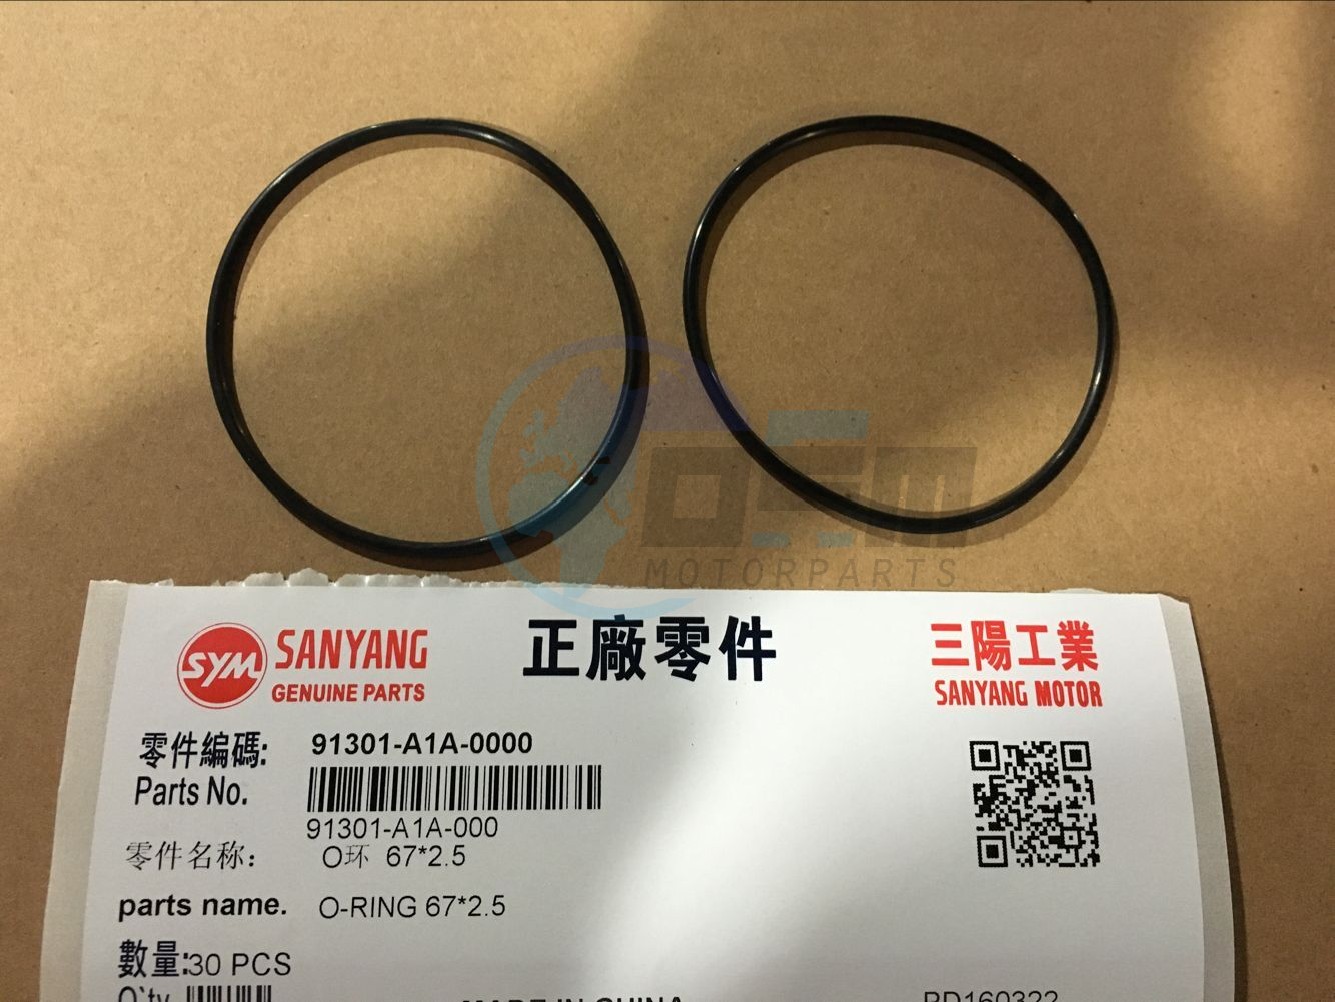 Product image: Sym - 91301-A1A-000 - O-RING 67X2.5  0